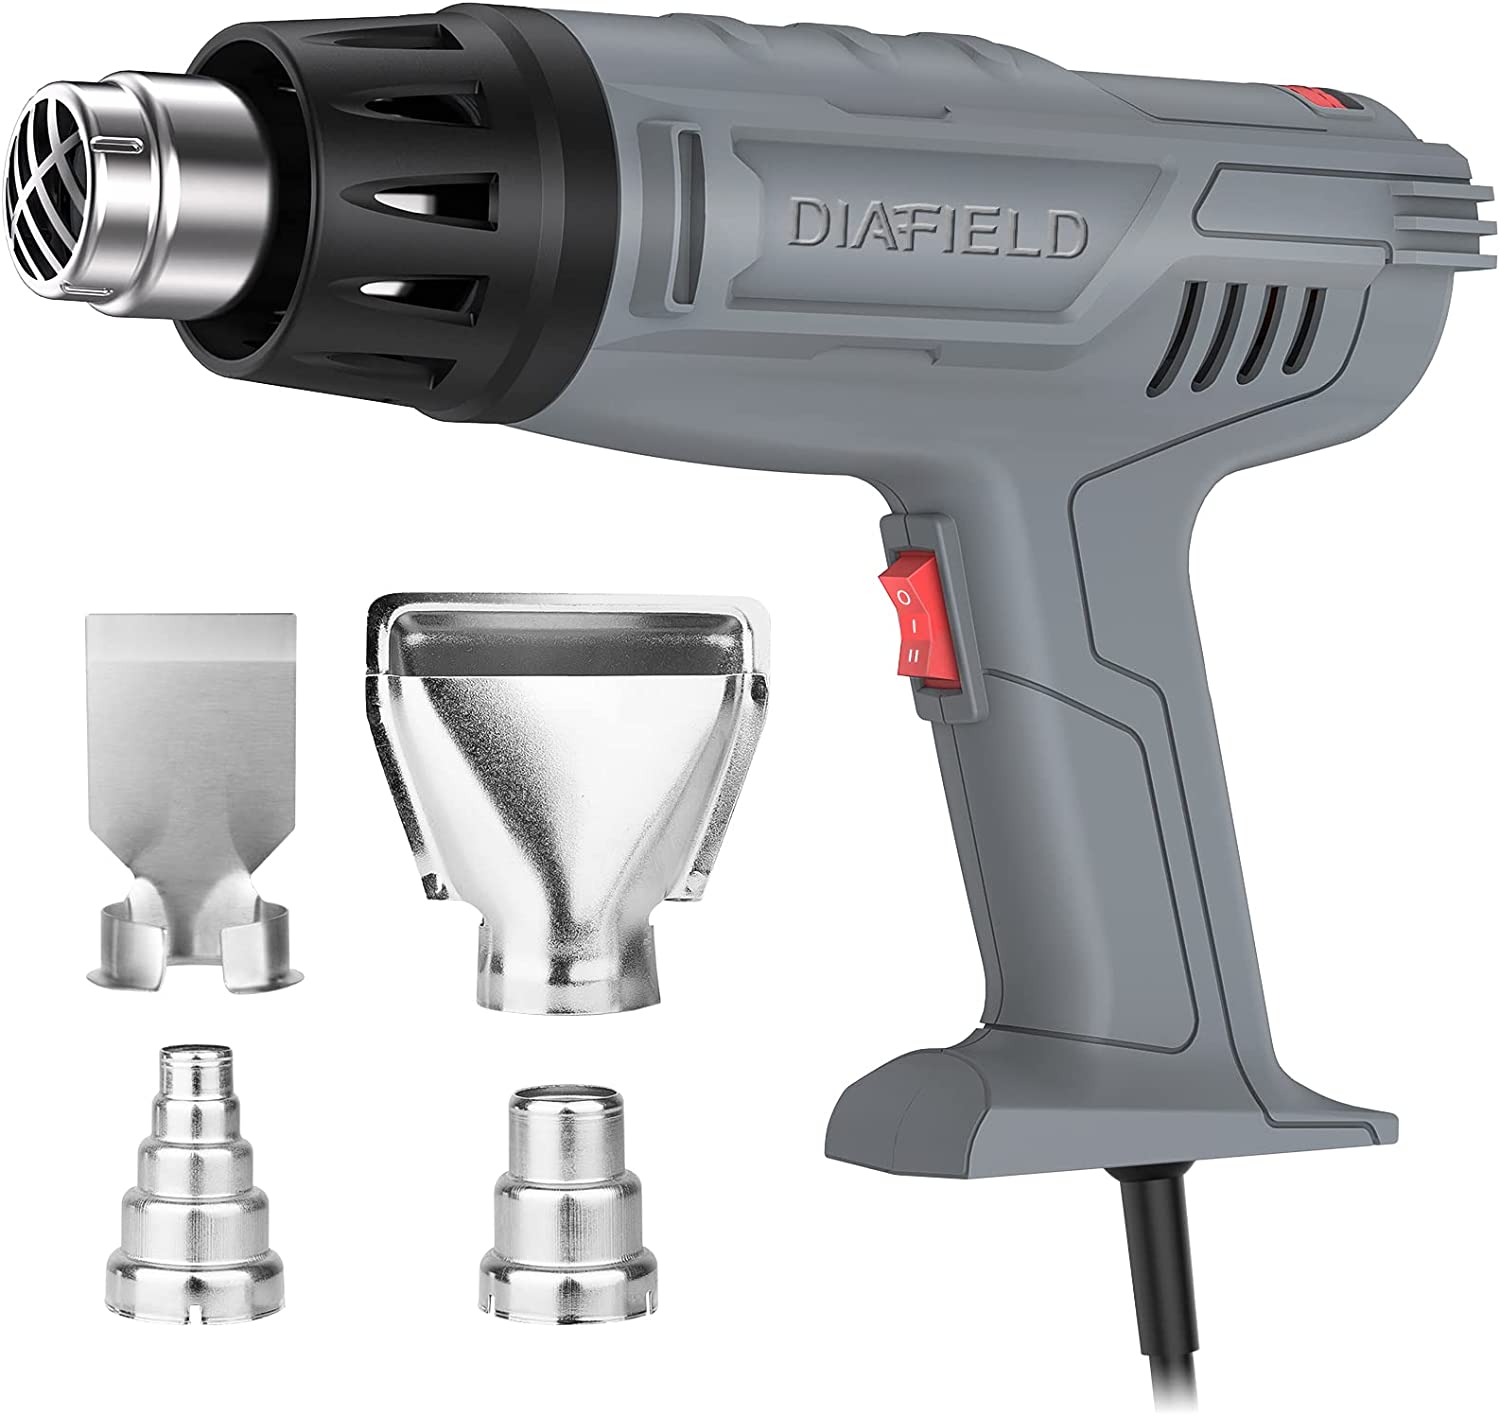 1850W Heat Gun Variable Temperature Settings 122?~1202??50?- 650??, AUTOXEL  Fast Heat Hot Air Gun, Durable& Overload Protection, with 4 Nozzels for  Shrink Wrap,Vinyl, Crafts, Epoxy Resin 